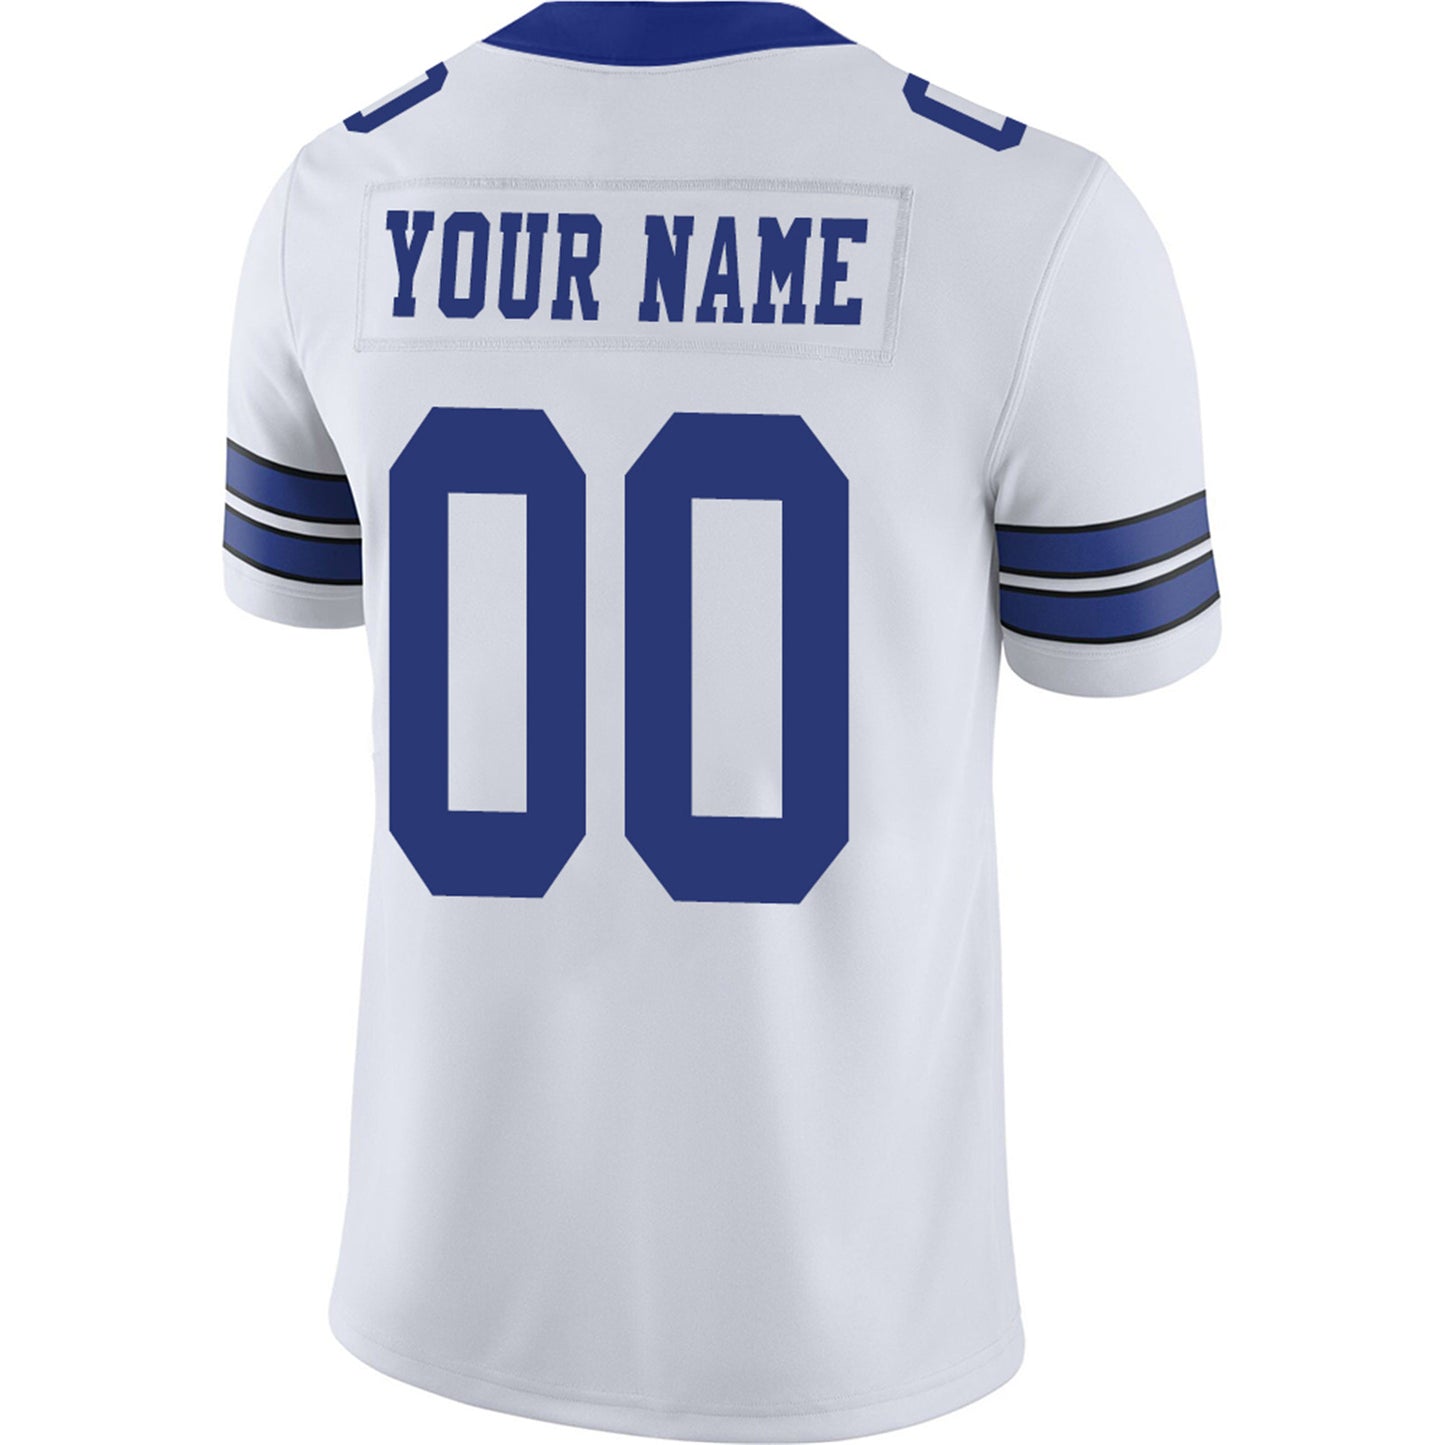 Custom D.Cowboys Football Jerseys Team Player or Personalized Design Your Own Name for Men's Women's Youth Jerseys Navy